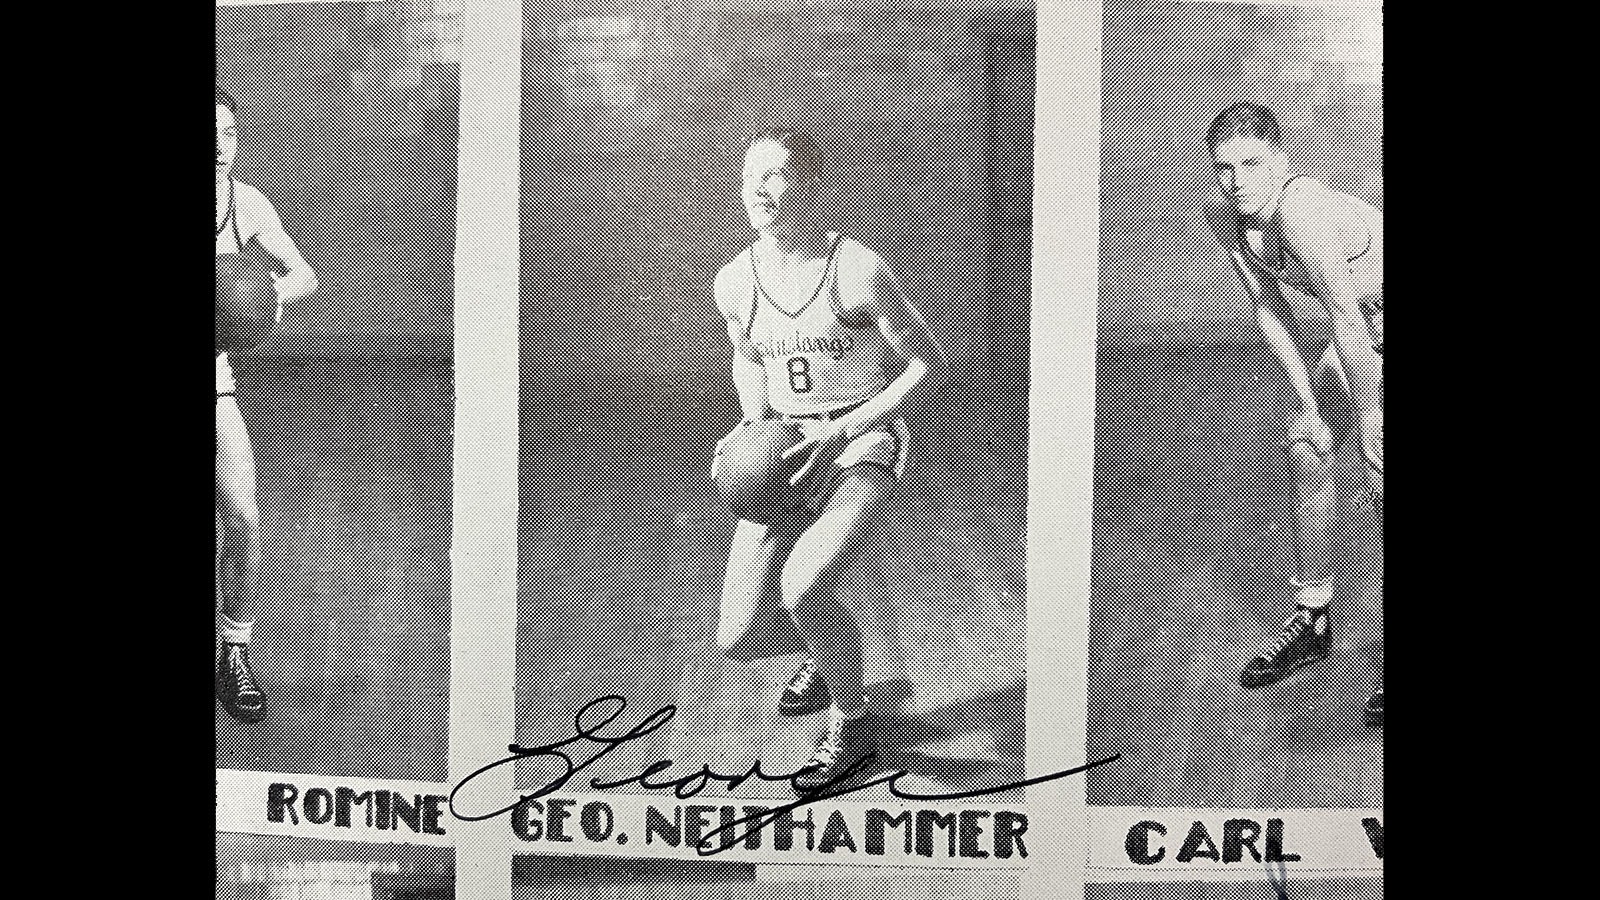 George Niethammer was an athlete who played several sports. He was the center on the Natrona County High School basketball team.